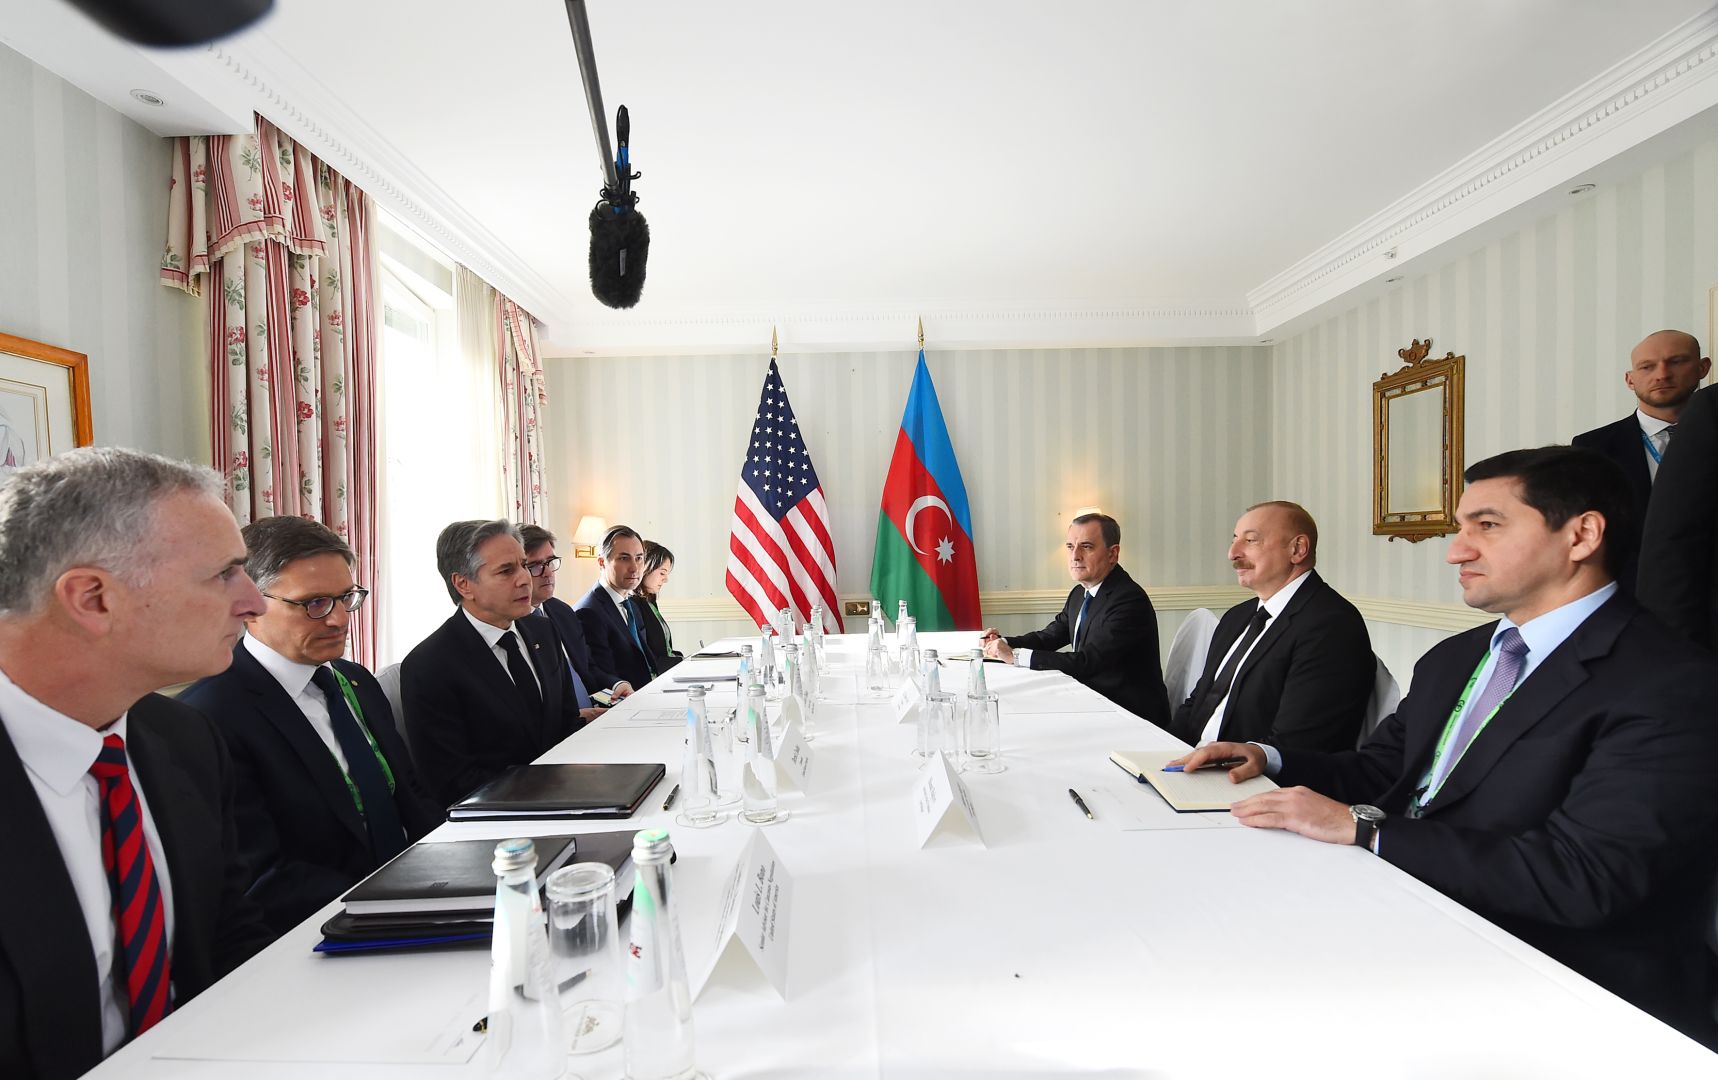 President of Azerbaijan meets with U.S. Secretary of State in Munich